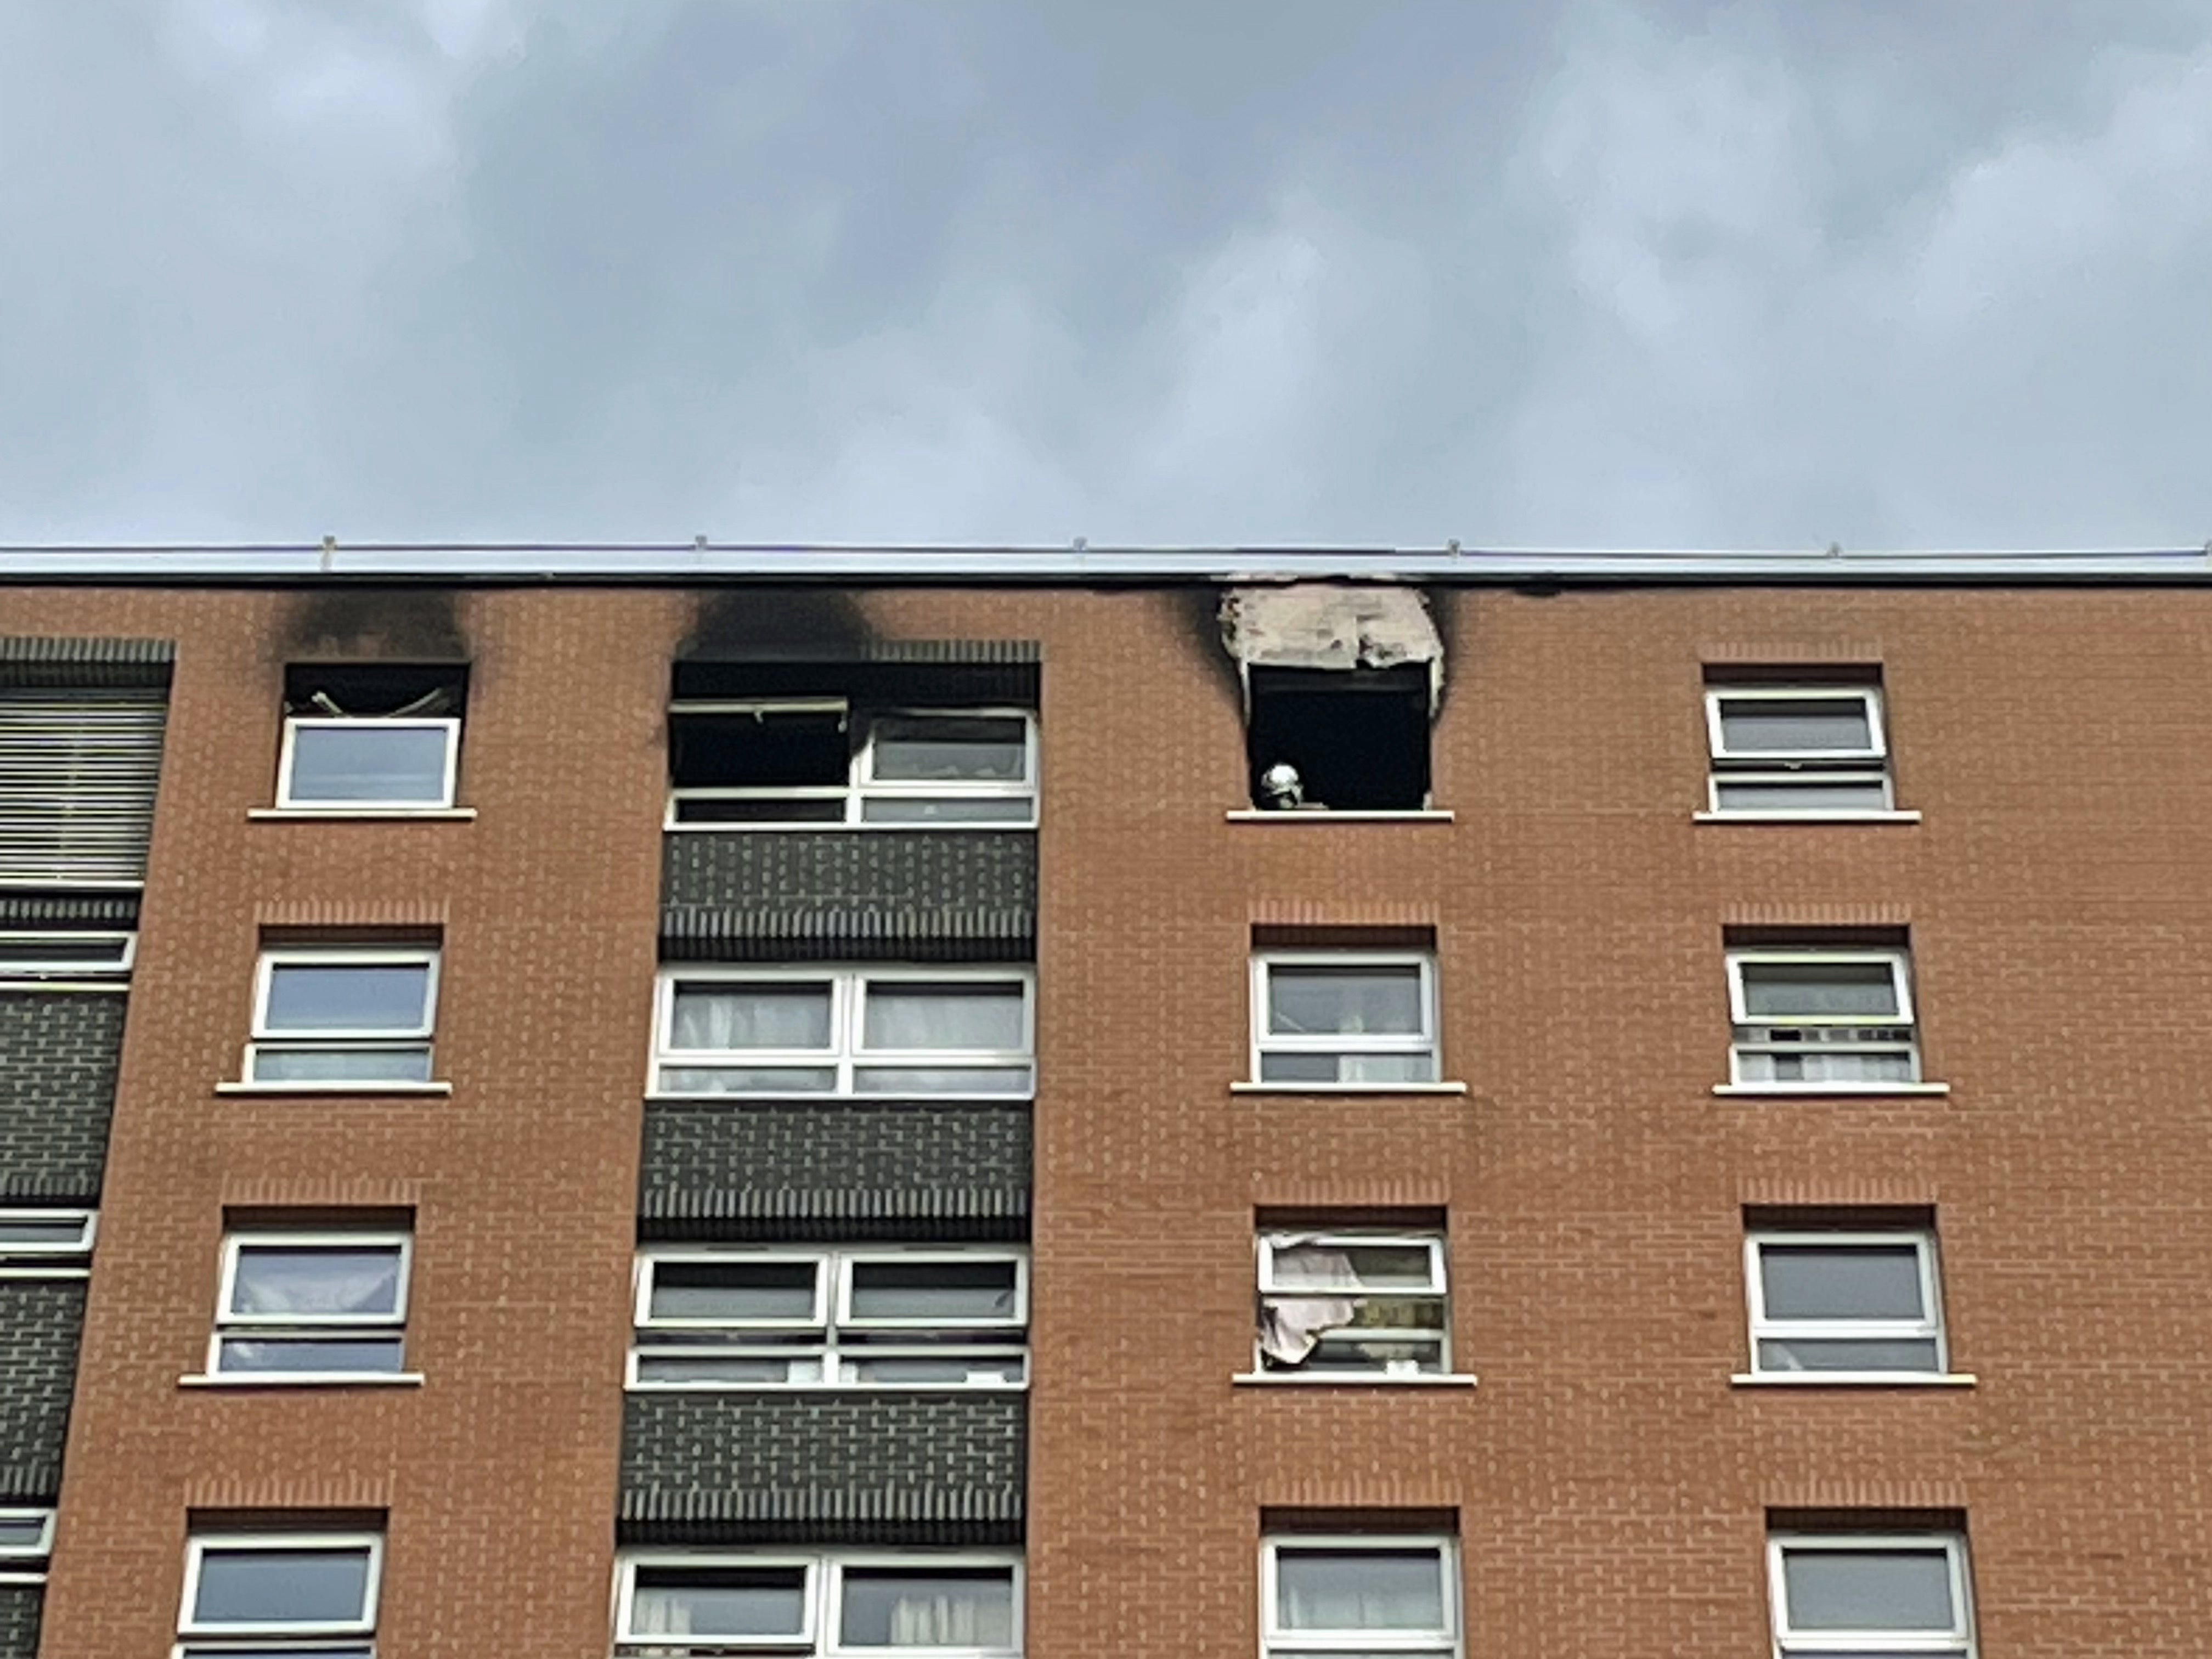 Eight people were hospitalised after the top-floor flat blaze in Easton, Bristol